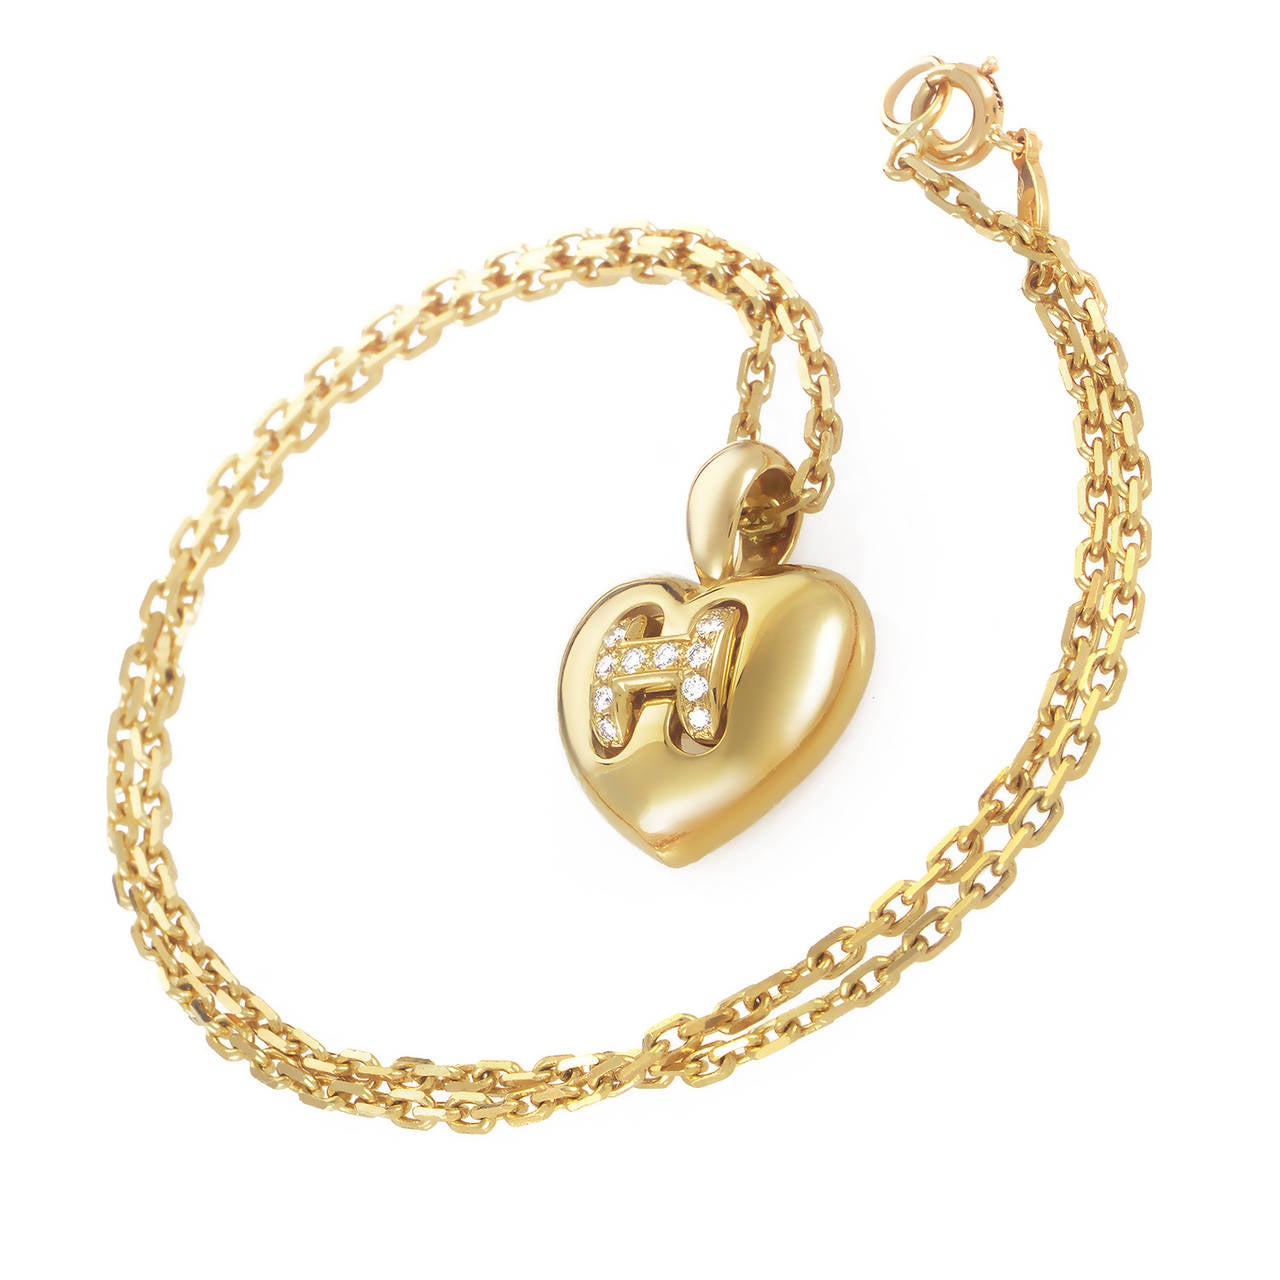 Dangling from a dependable, elegant 18K yellow gold chain with a spring ring, the romantic heart pendant of this feminine necklace from Hermes incorporates the characteristic H-shaped element set with diamonds for an extra touch of